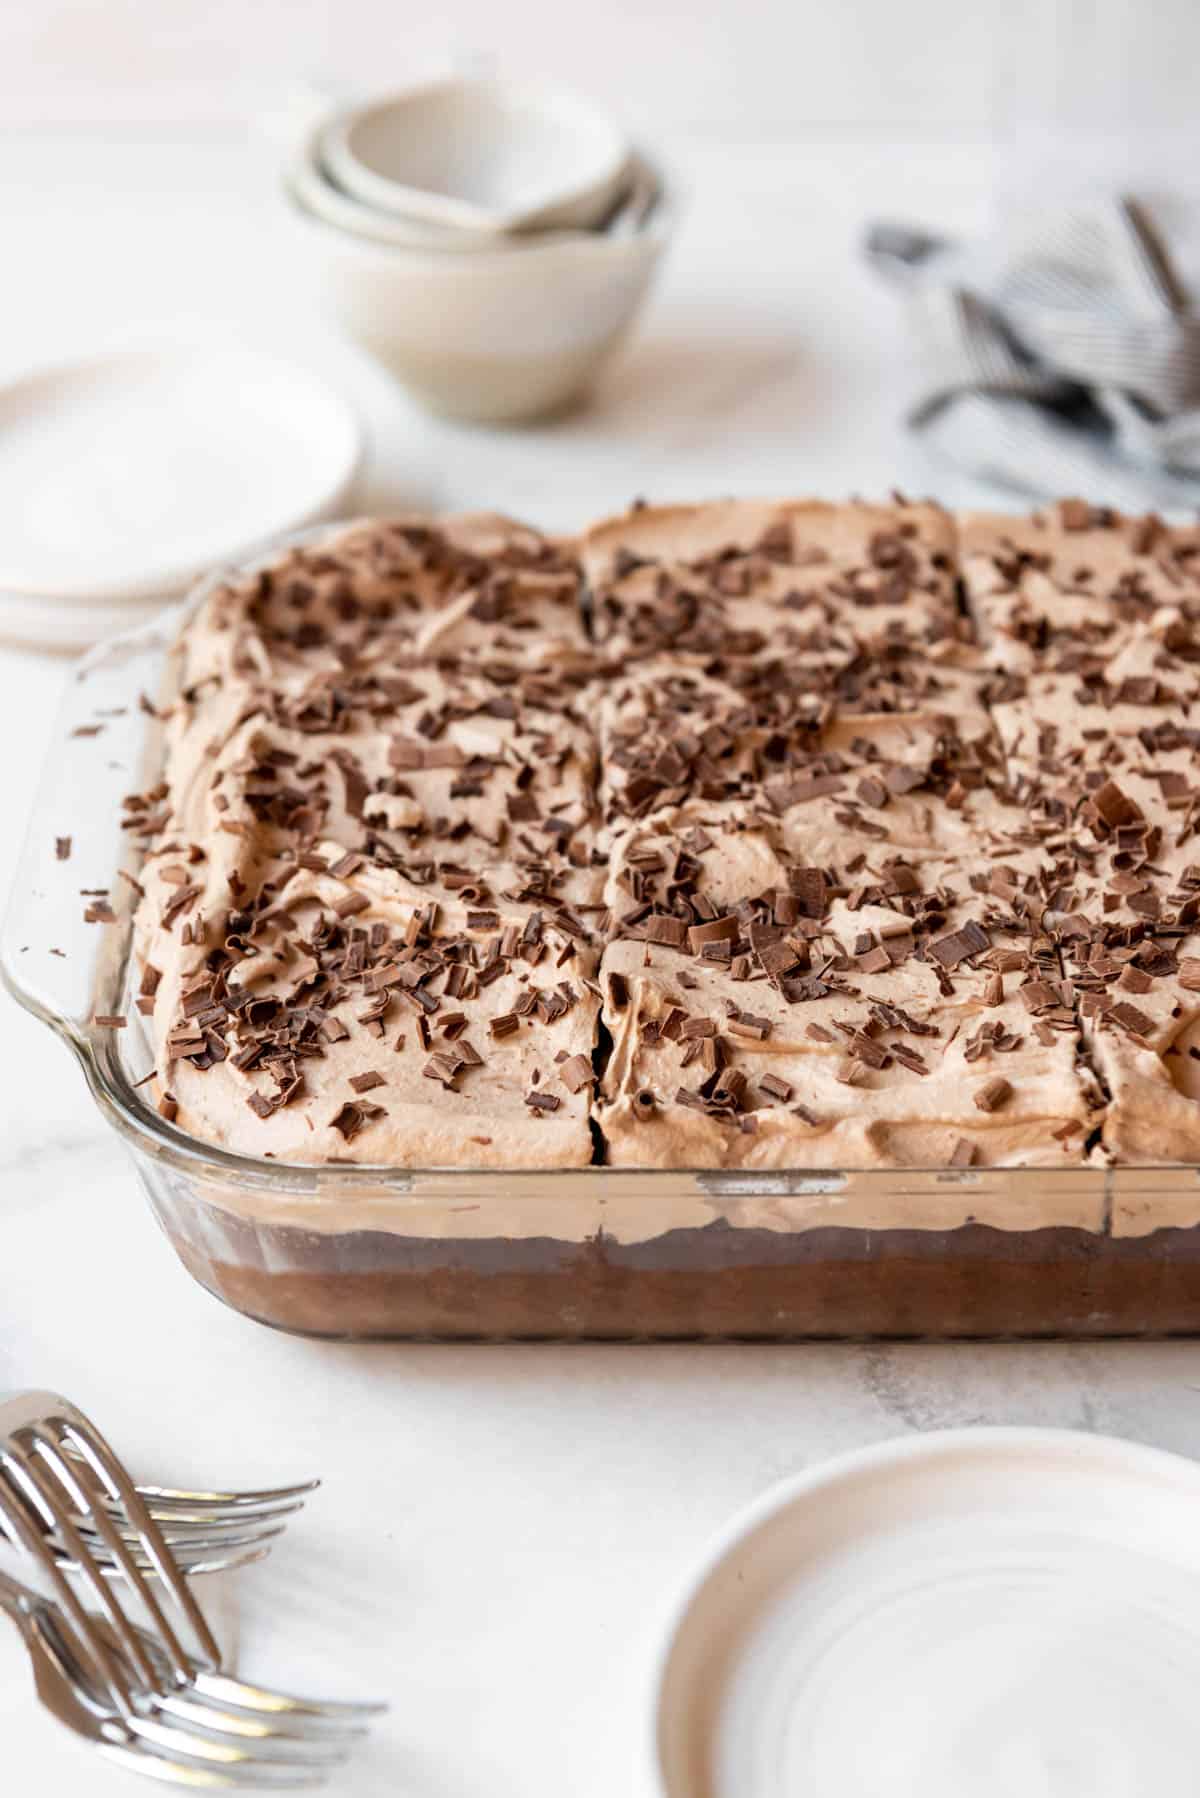 A chocolate tres leches cake with chocolate whipped cream on top.